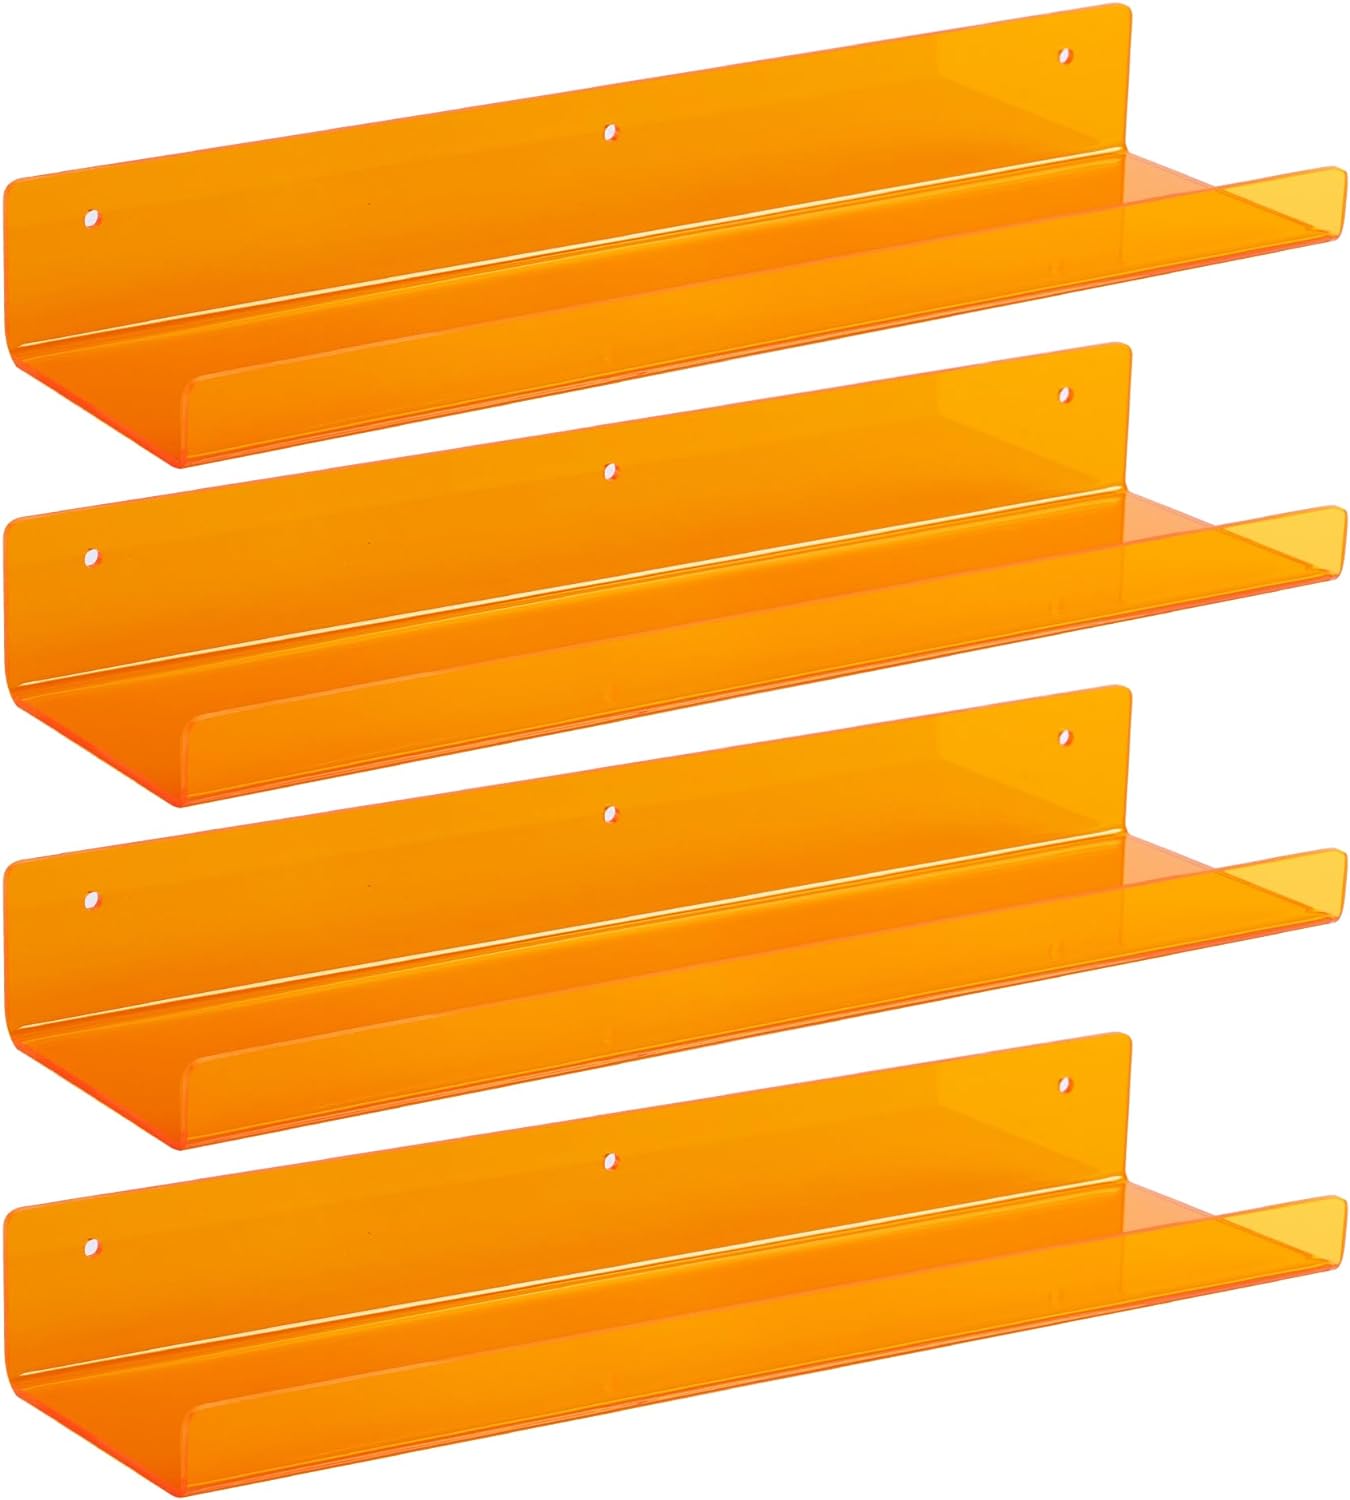 upsimples Clear Orange Acrylic Shelves for Wall Storage, 15